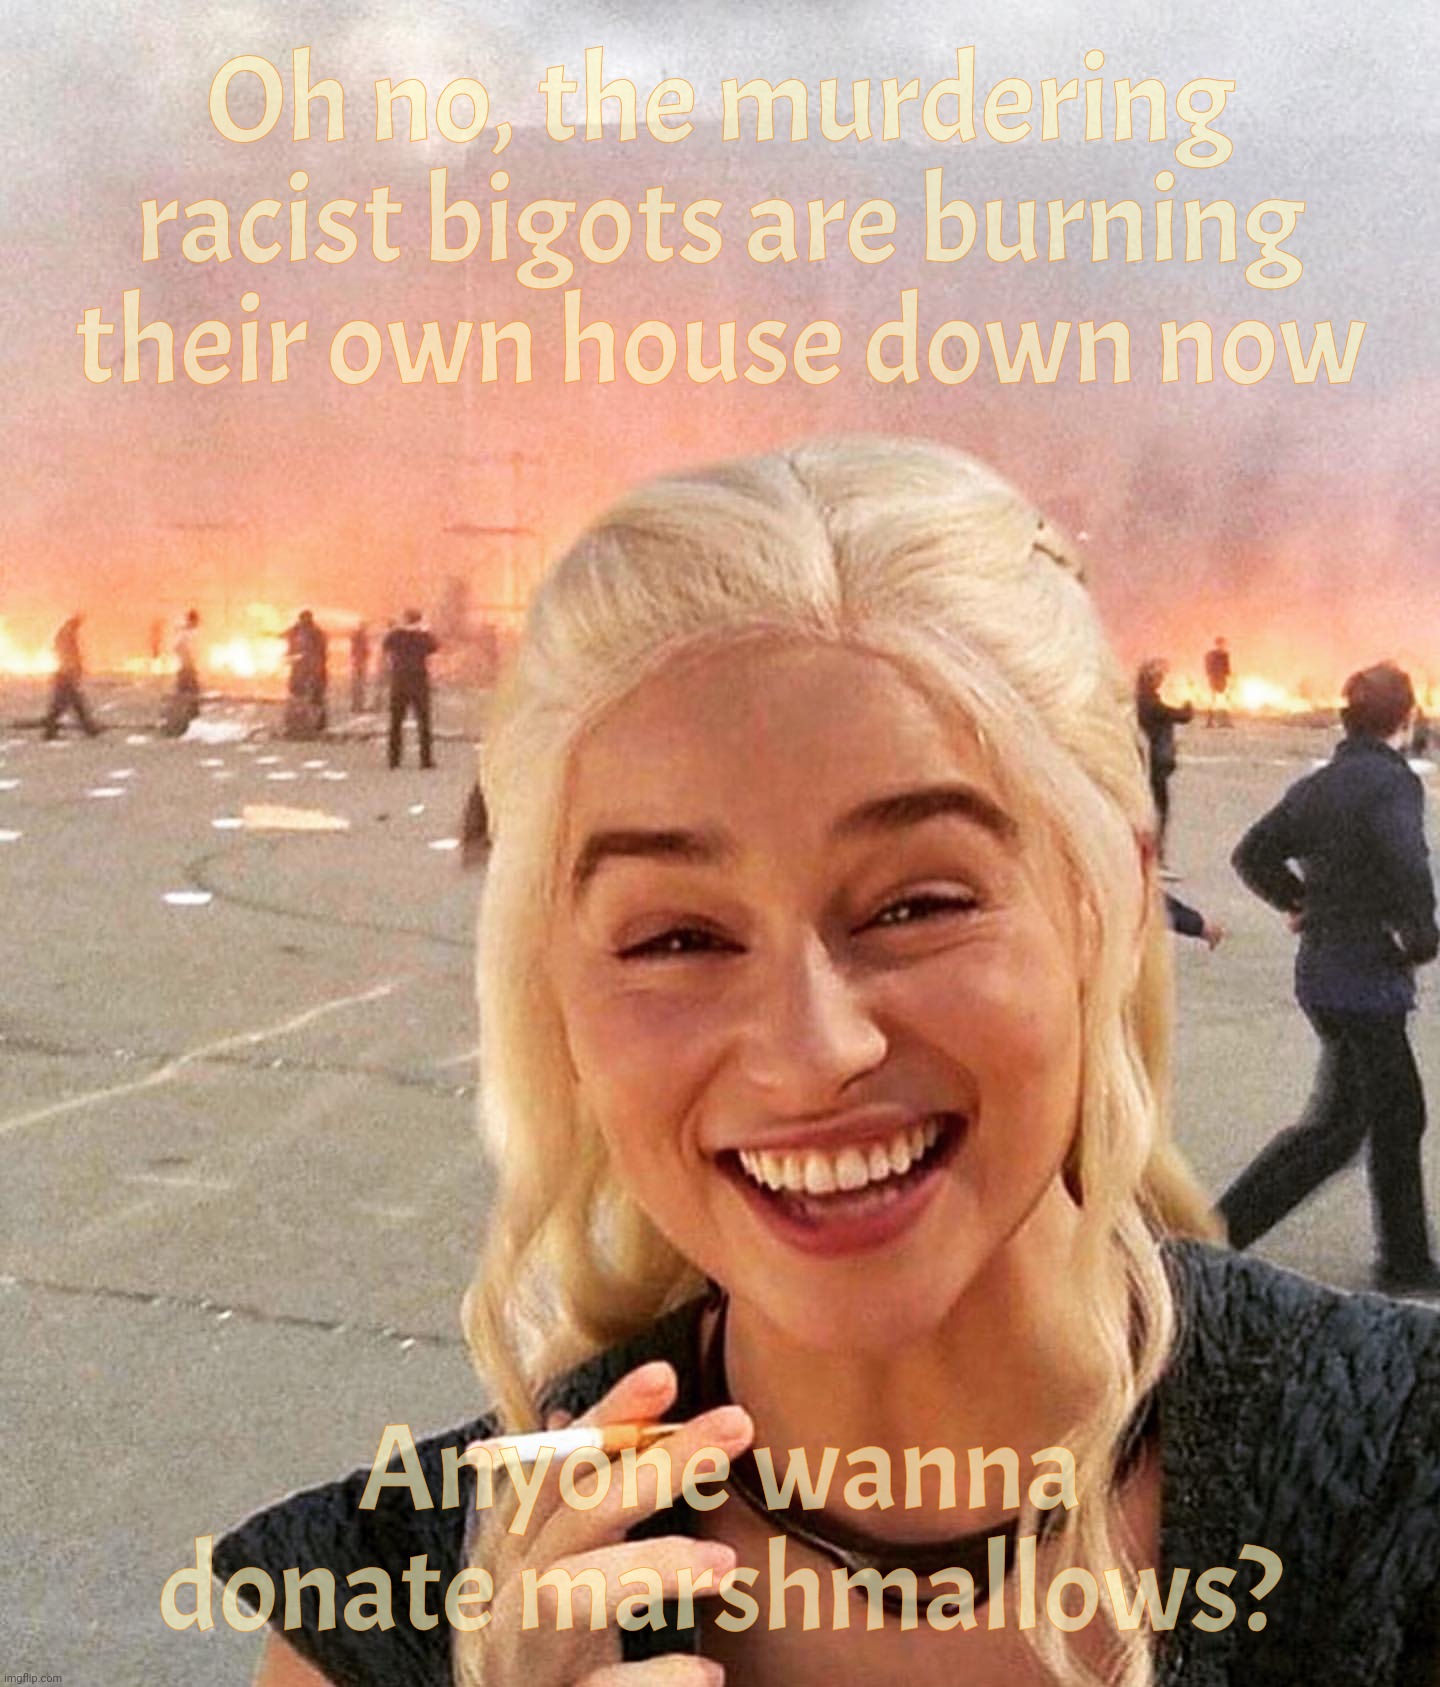 Self determination shall continue onwards  whether we want them to or not | Oh no, the murdering racist bigots are burning their own house down now Anyone wanna donate marshmallows? | image tagged in disaster smoker girl,sudan civil war,sudan,reap what they sew,see what i did there,toast them marshmallows | made w/ Imgflip meme maker